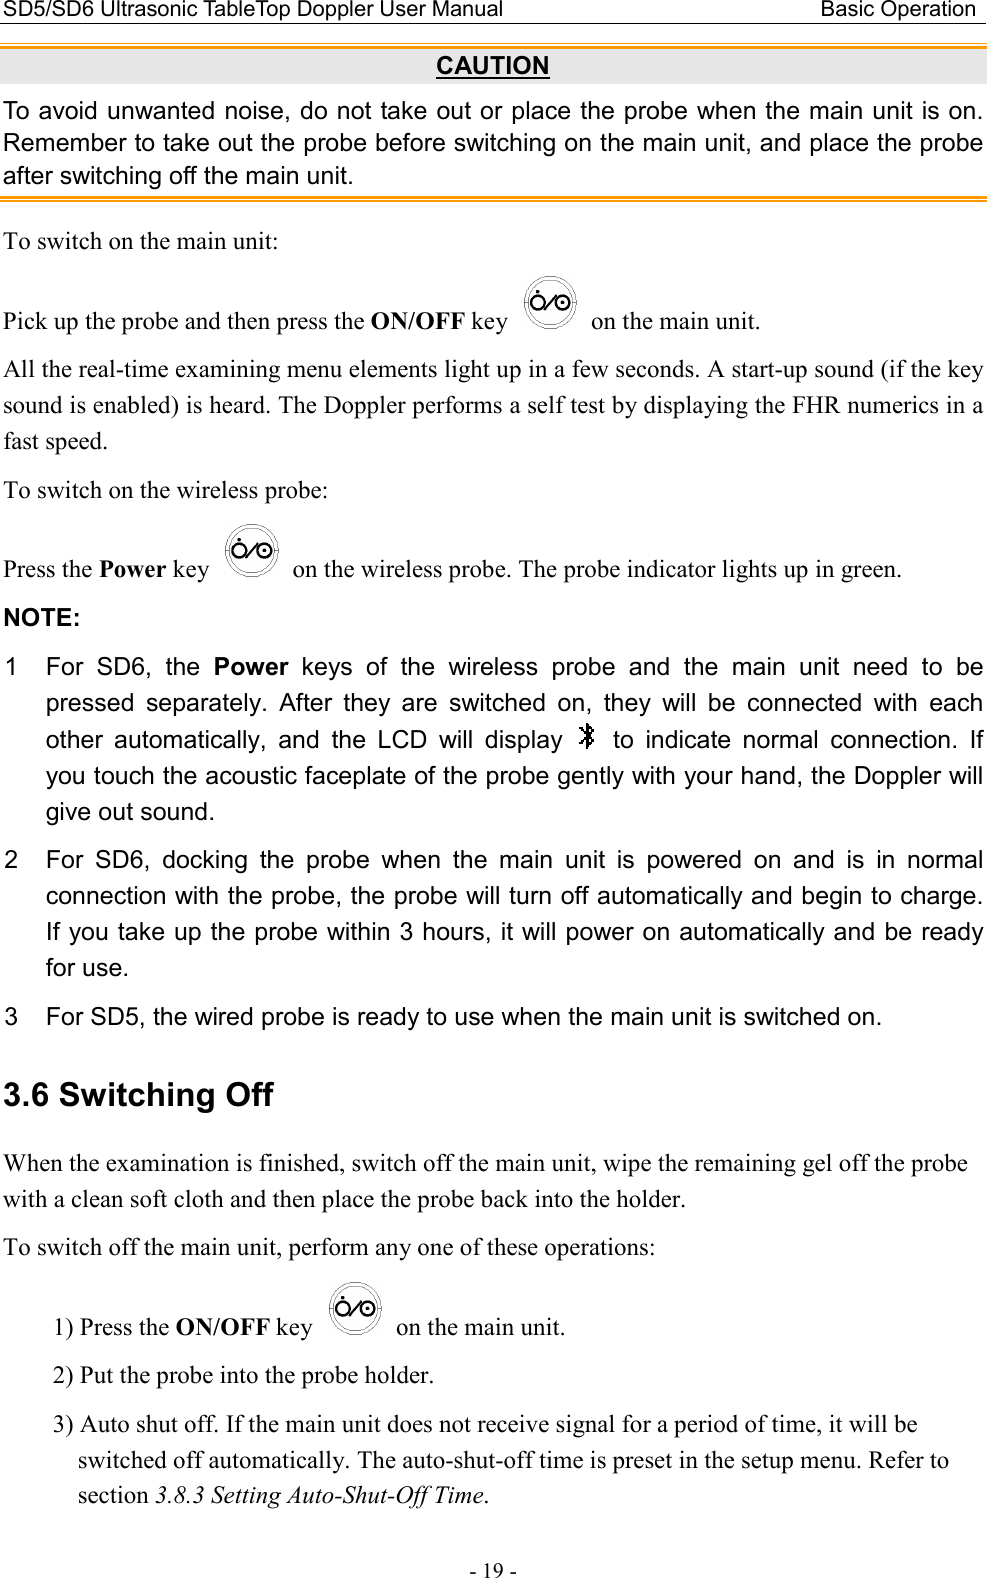 SD5/SD6 Ultrasonic TableTop Doppler User Manual                                                          Basic Operation - 19 - CAUTION To avoid unwanted noise, do not take out or place the probe when the main unit is on. Remember to take out the probe before switching on the main unit, and place the probe after switching off the main unit. To switch on the main unit: Pick up the probe and then press the ON/OFF key    on the main unit. All the real-time examining menu elements light up in a few seconds. A start-up sound (if the key sound is enabled) is heard. The Doppler performs a self test by displaying the FHR numerics in a fast speed. To switch on the wireless probe: Press the Power key    on the wireless probe. The probe indicator lights up in green. NOTE:   1  For  SD6,  the  Power  keys  of  the  wireless  probe  and  the  main  unit  need  to  be pressed  separately.  After  they  are  switched  on,  they  will  be  connected  with  each other  automatically,  and  the  LCD  will  display    to  indicate  normal  connection.  If you touch the acoustic faceplate of the probe gently with your hand, the Doppler will give out sound. 2  For  SD6,  docking  the  probe  when  the  main  unit  is  powered  on  and  is  in  normal connection with the probe, the probe will turn off automatically and begin to charge. If you take up the probe within 3 hours, it will power on automatically and be ready for use.   3  For SD5, the wired probe is ready to use when the main unit is switched on. 3.6 Switching Off When the examination is finished, switch off the main unit, wipe the remaining gel off the probe with a clean soft cloth and then place the probe back into the holder. To switch off the main unit, perform any one of these operations: 1) Press the ON/OFF key    on the main unit. 2) Put the probe into the probe holder. 3) Auto shut off. If the main unit does not receive signal for a period of time, it will be switched off automatically. The auto-shut-off time is preset in the setup menu. Refer to section 3.8.3 Setting Auto-Shut-Off Time. 